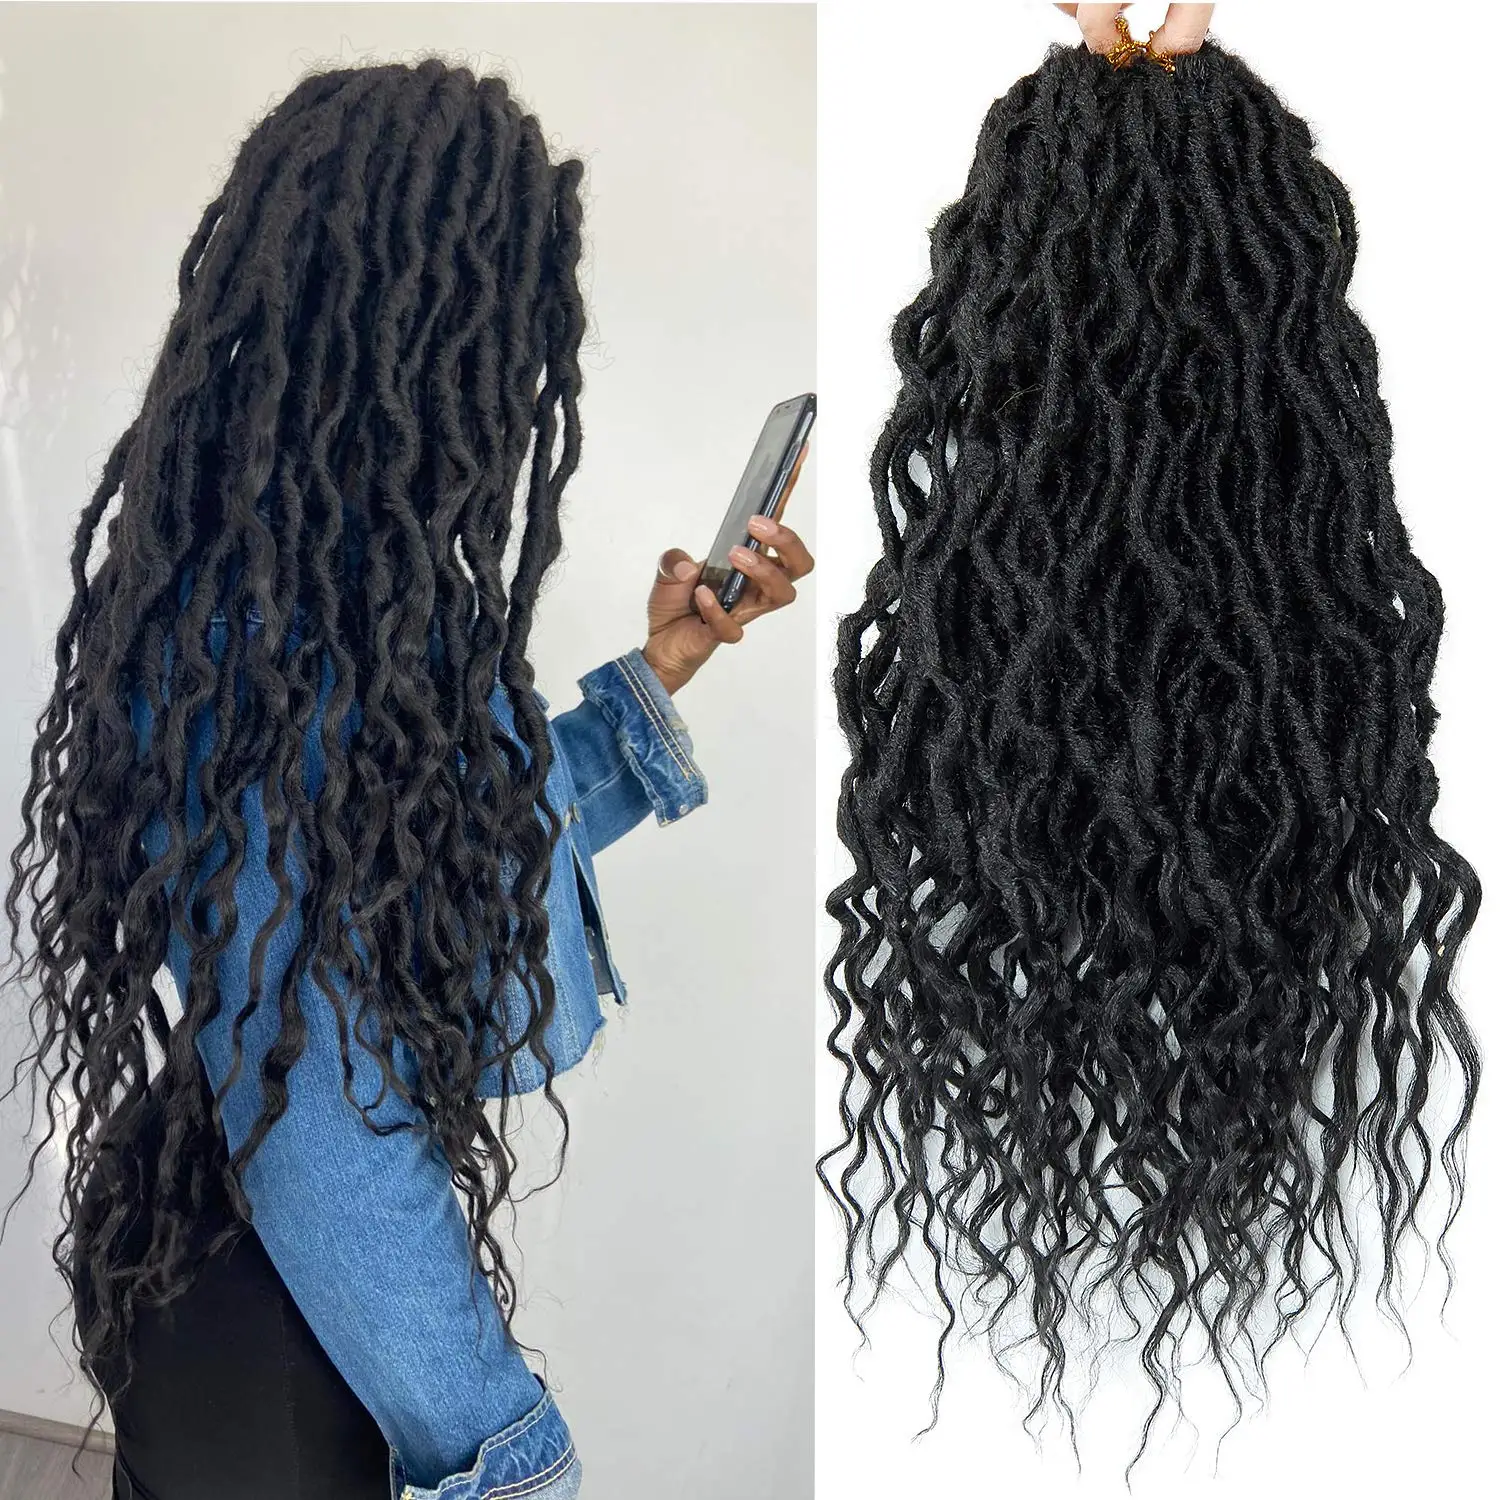 Synthetic Faux Locs Crochet Hair Pre-looped Goddess Locs with Soft Curly Ends Dreadlocks Braids Hair Extensions for Women